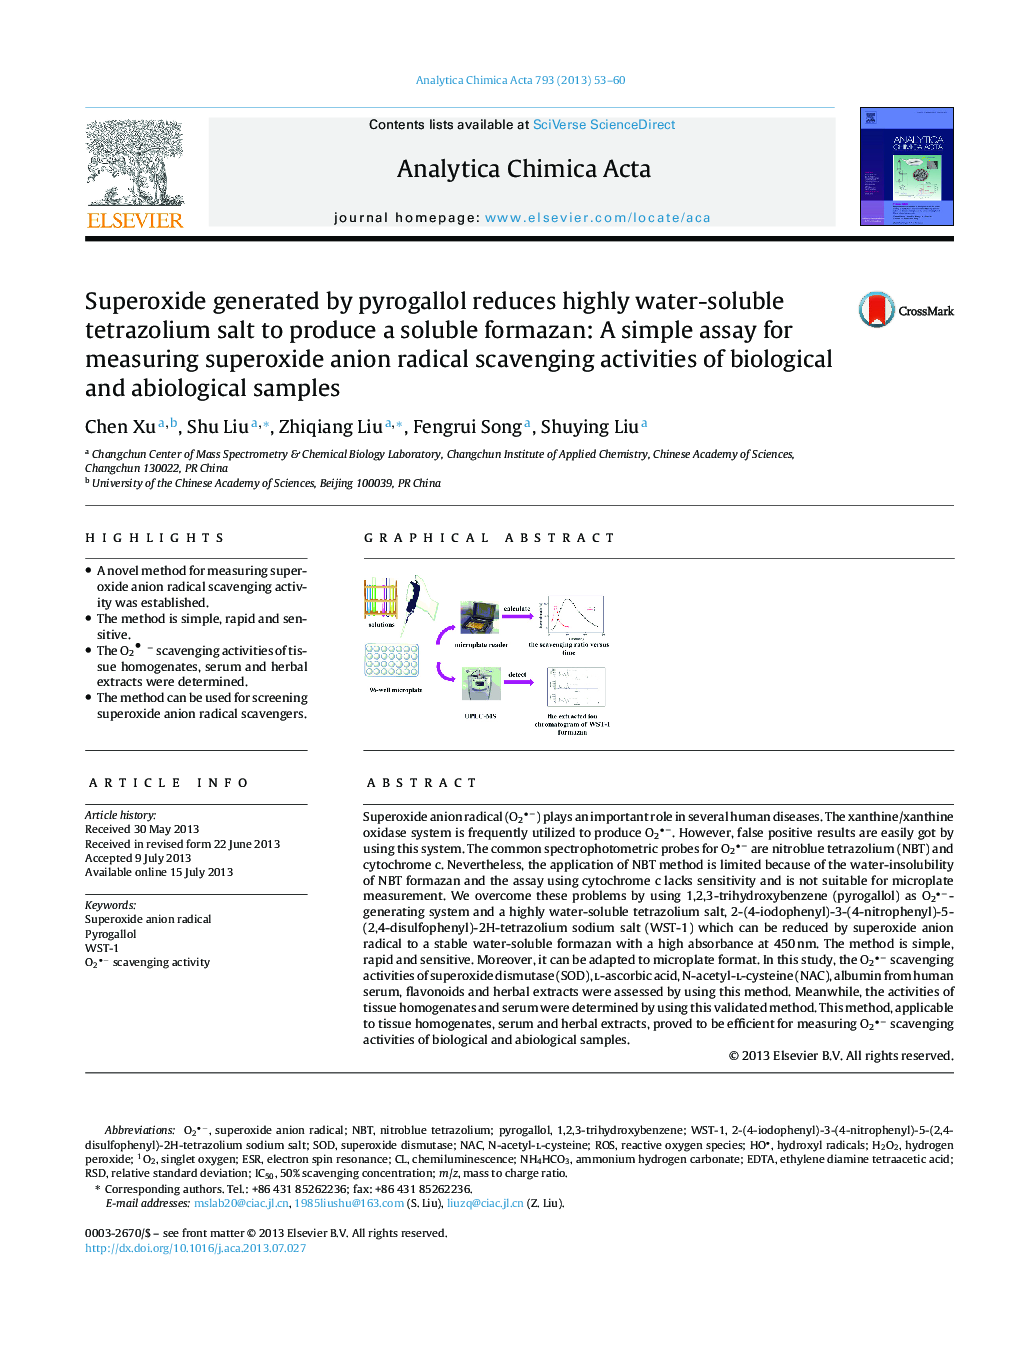 Superoxide generated by pyrogallol reduces highly water-soluble tetrazolium salt to produce a soluble formazan: A simple assay for measuring superoxide anion radical scavenging activities of biological and abiological samples